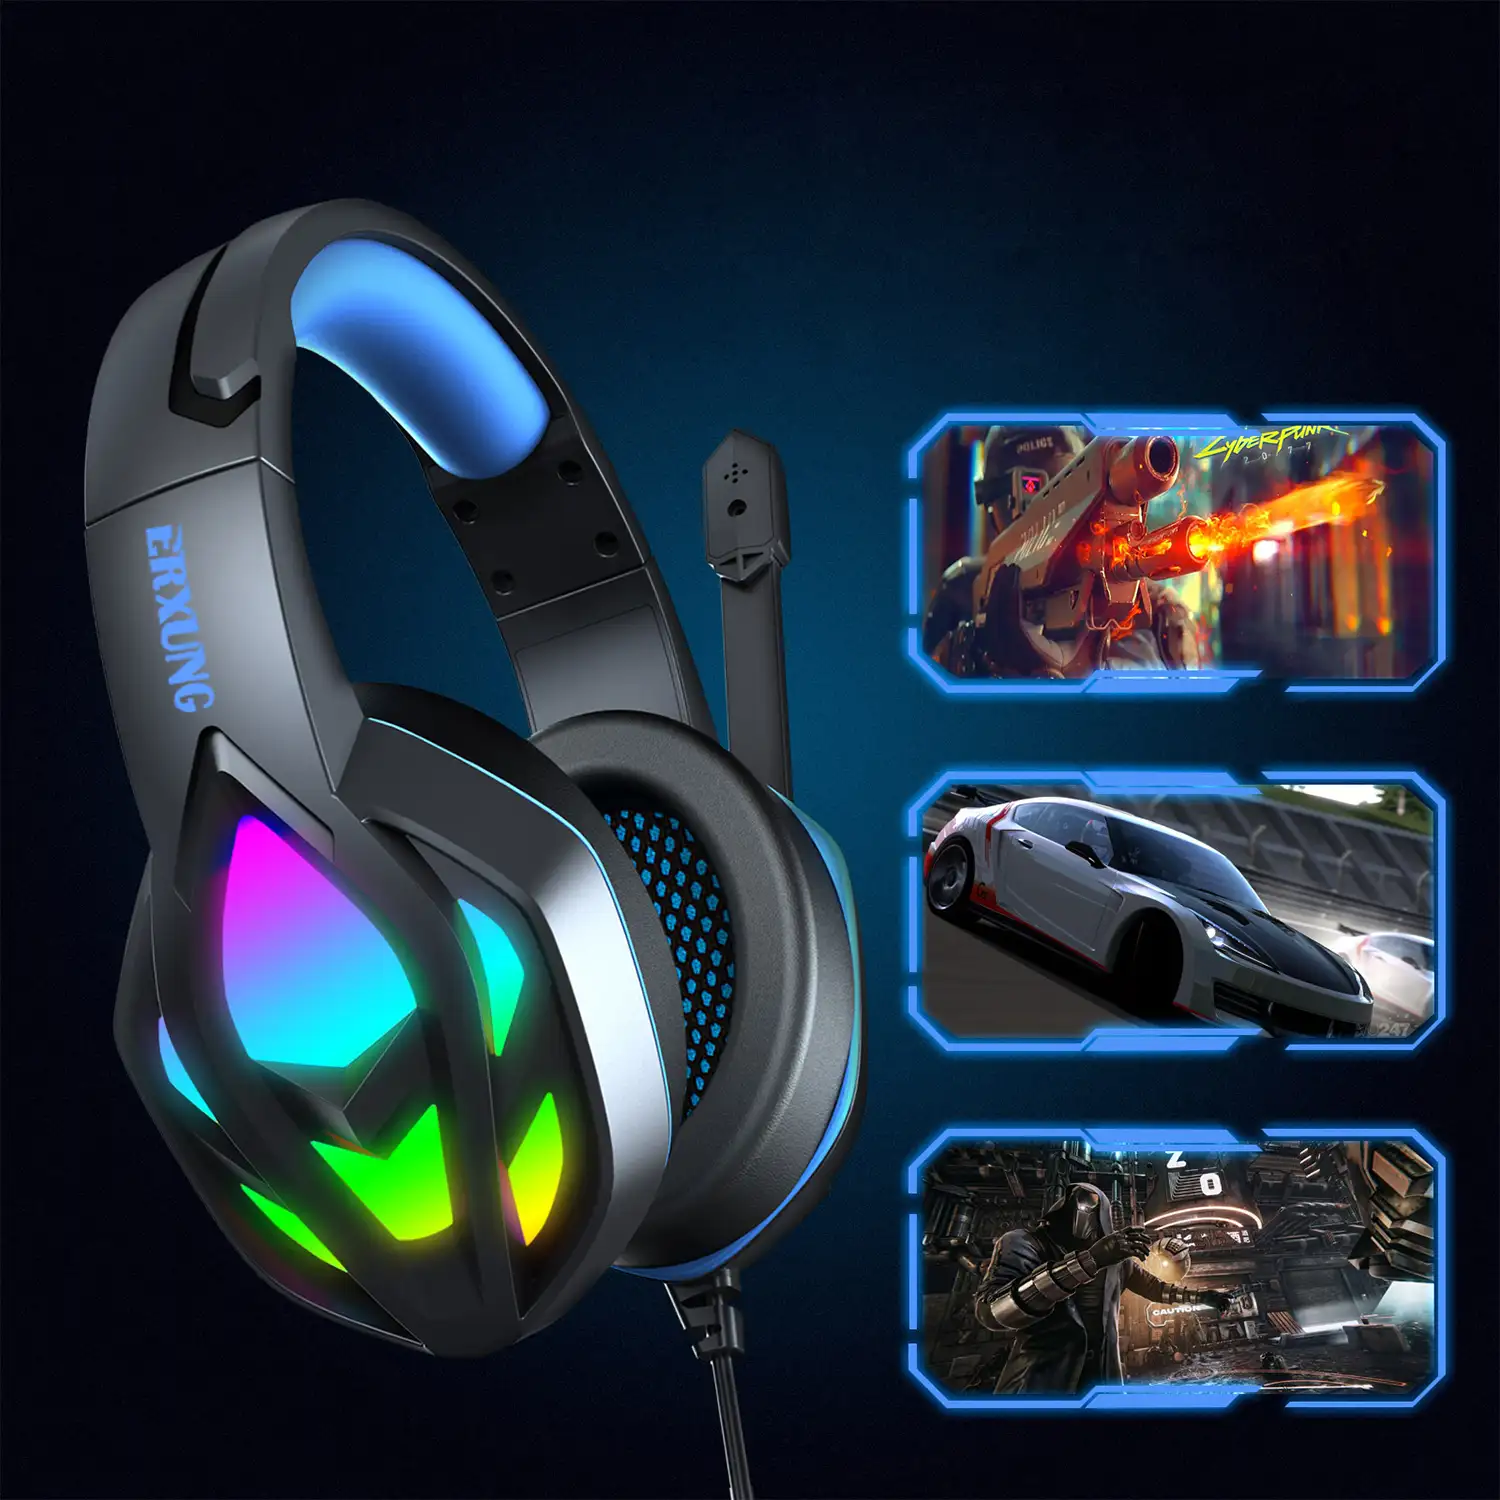 Cascos Gaming compatibles con ps4, xbox,ps5 ,pc RBG luces led